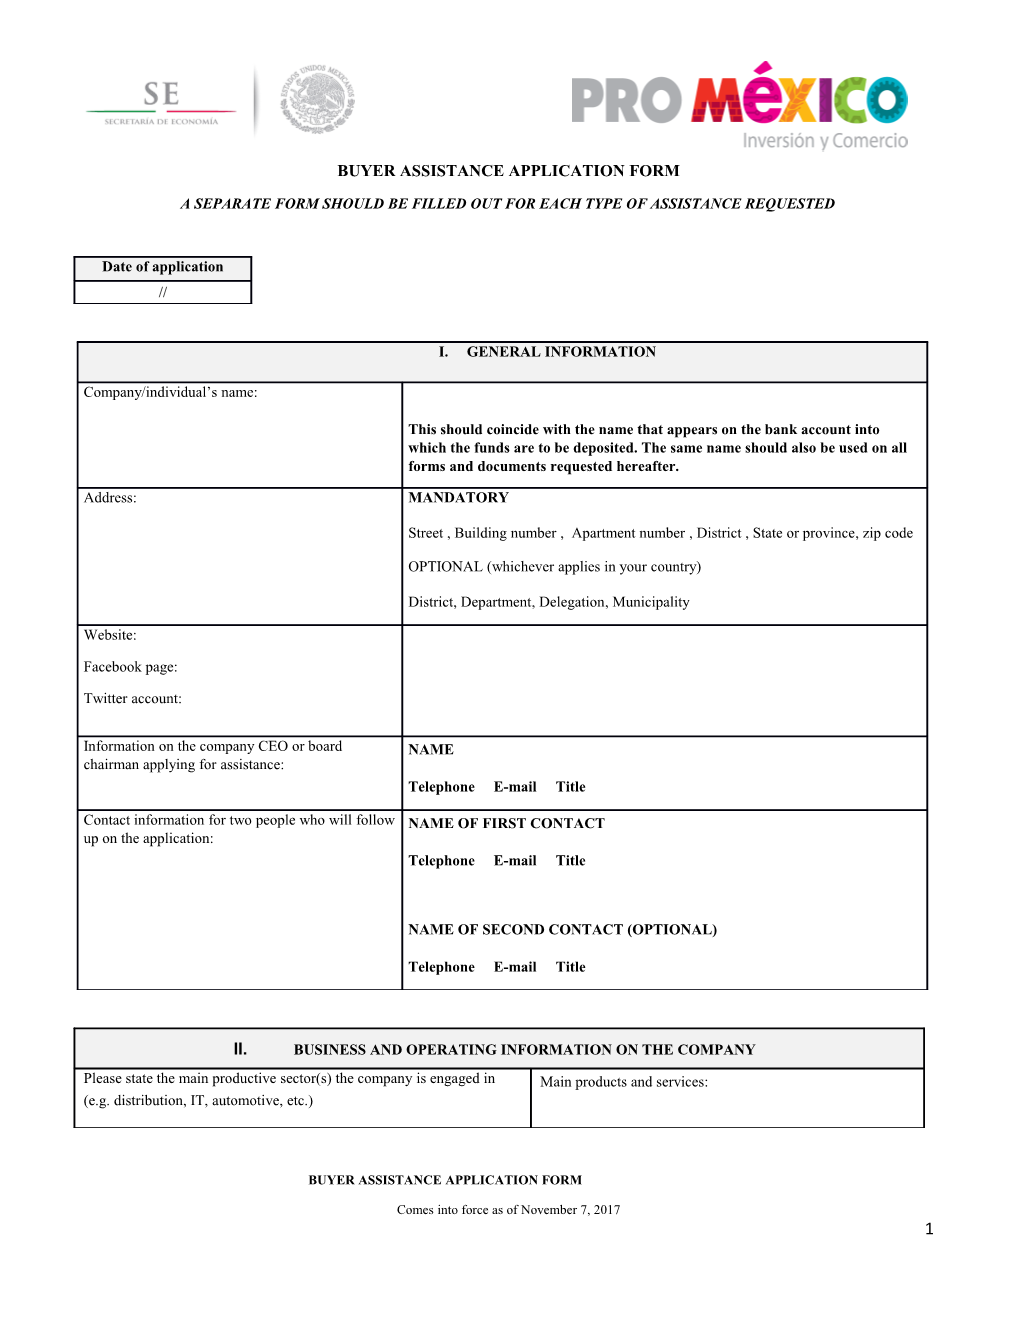 Buyer Assistance Application Form